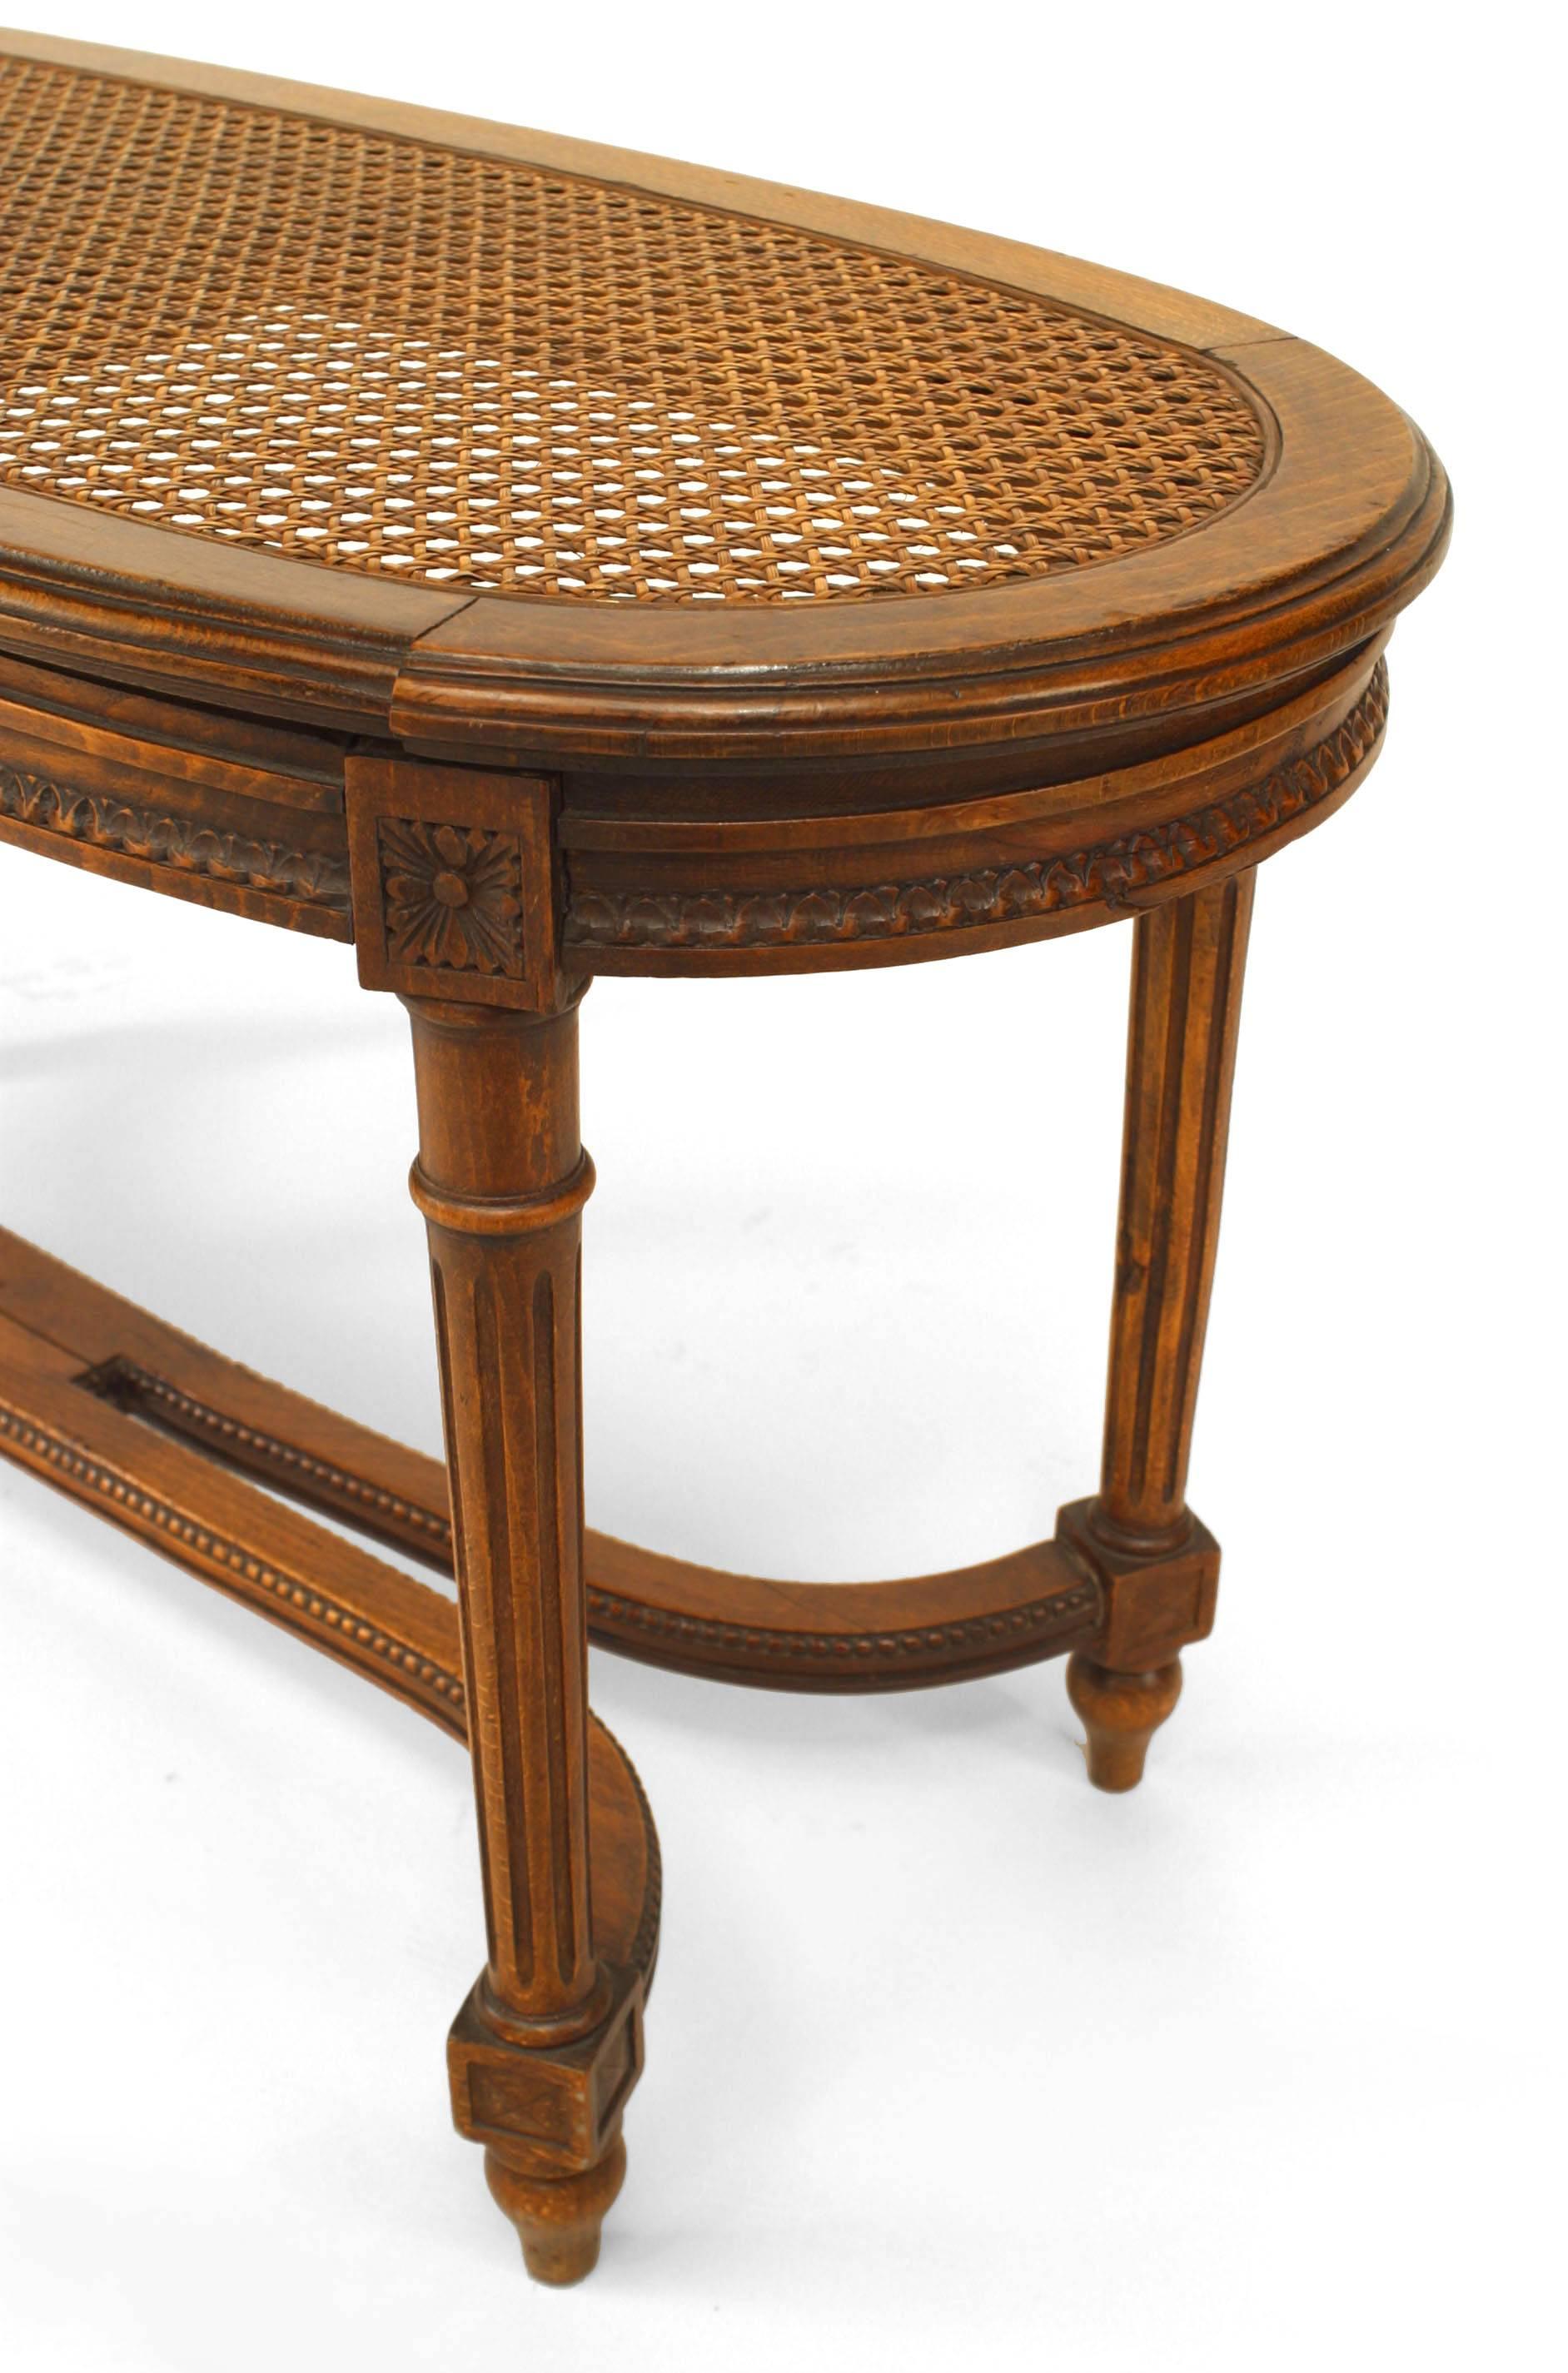 French Louis XVI style (19th Century) walnut oval shaped bench with double stretcher and inset cane seat.
